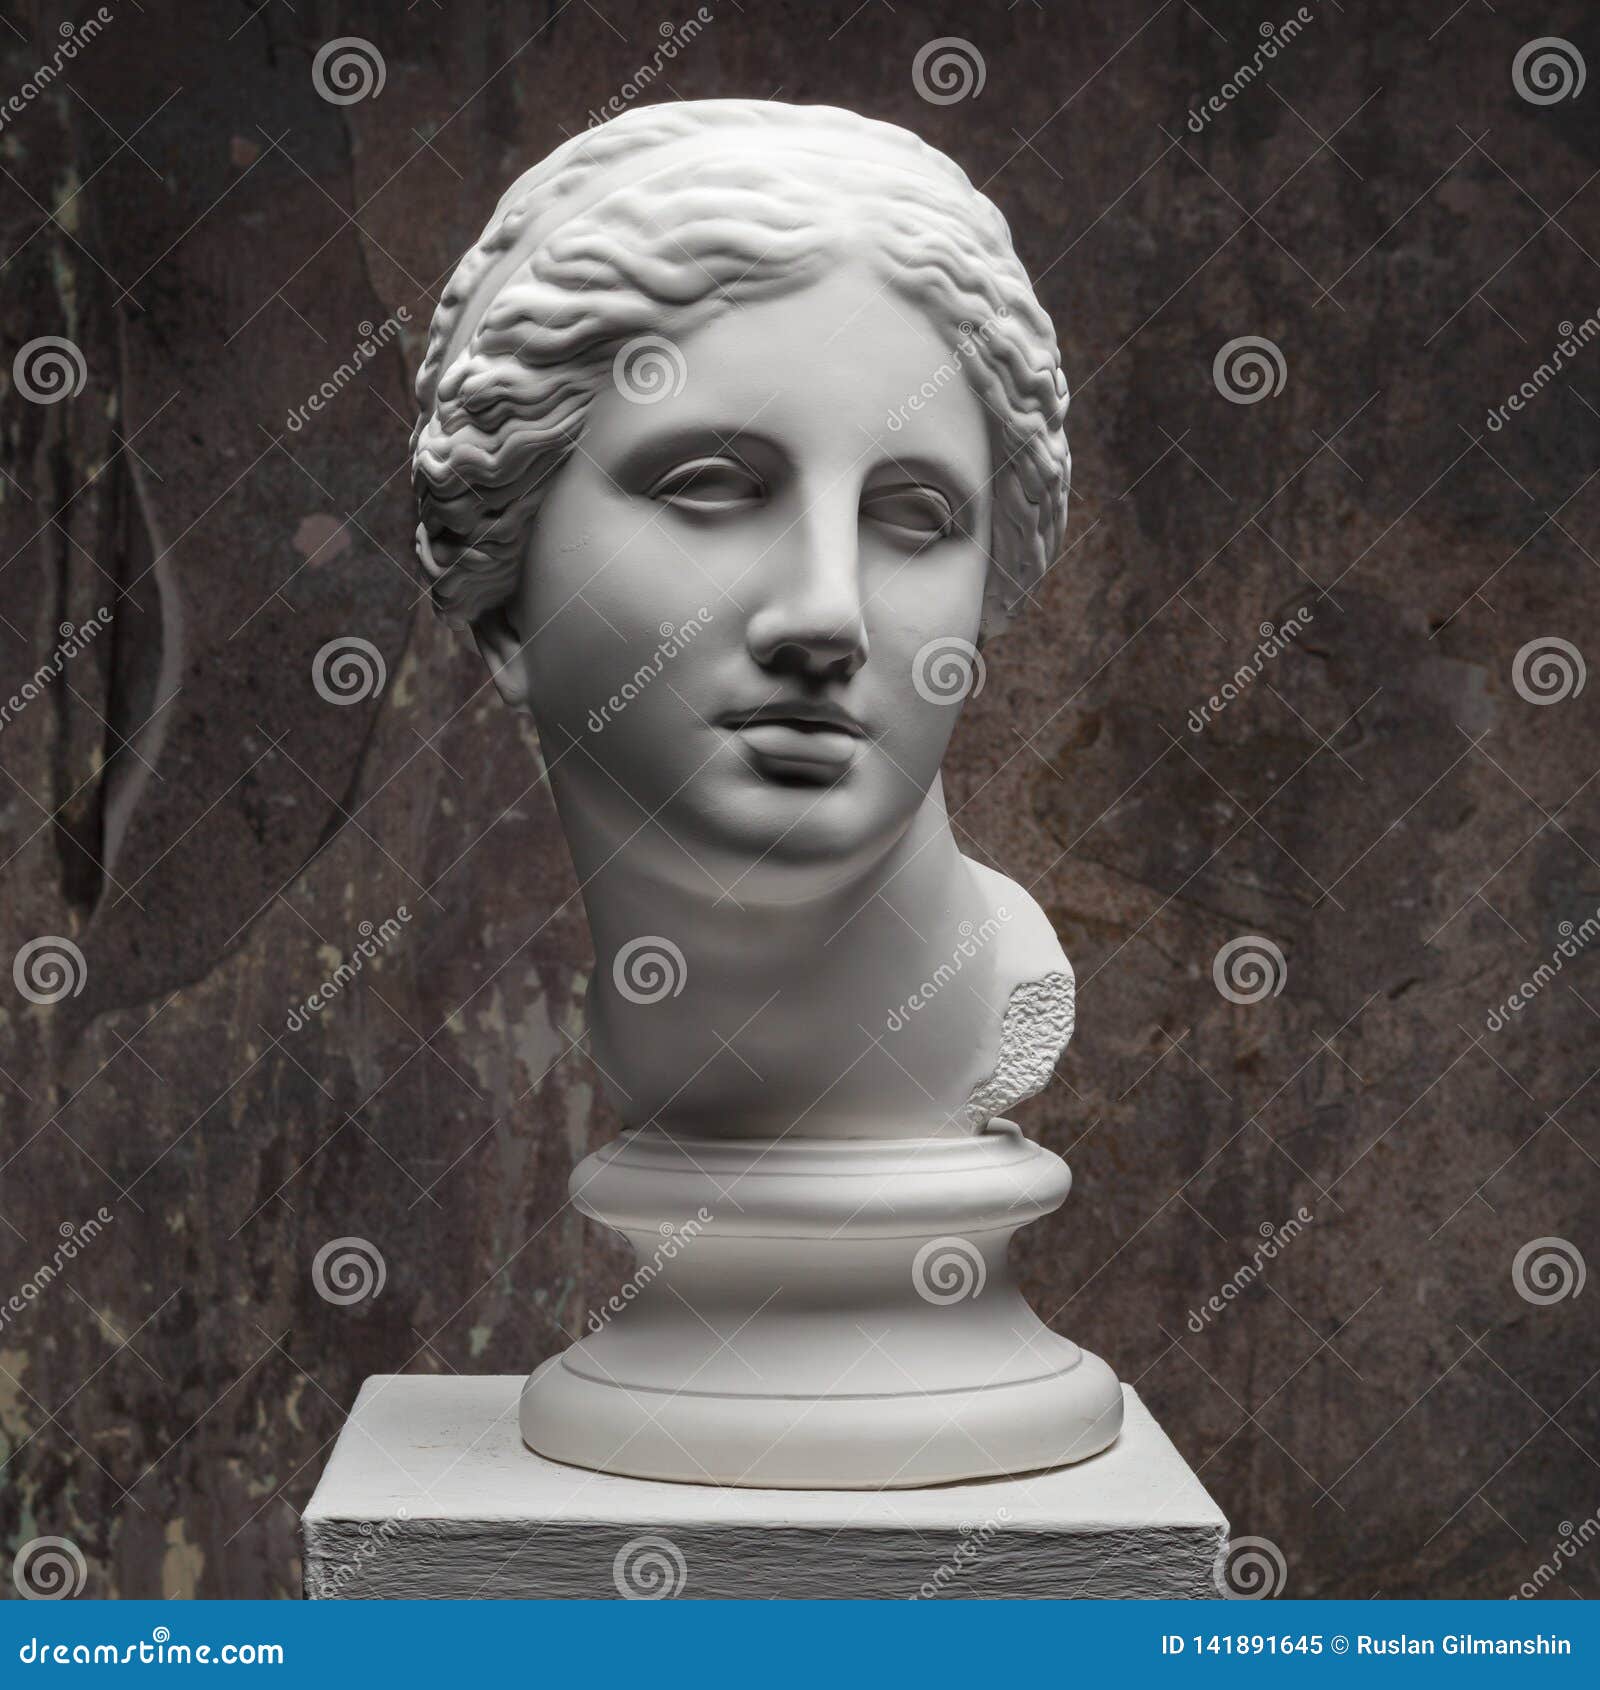 white marble head of young woman. statue art sculpture of stone face. ancient beautiful woman monument